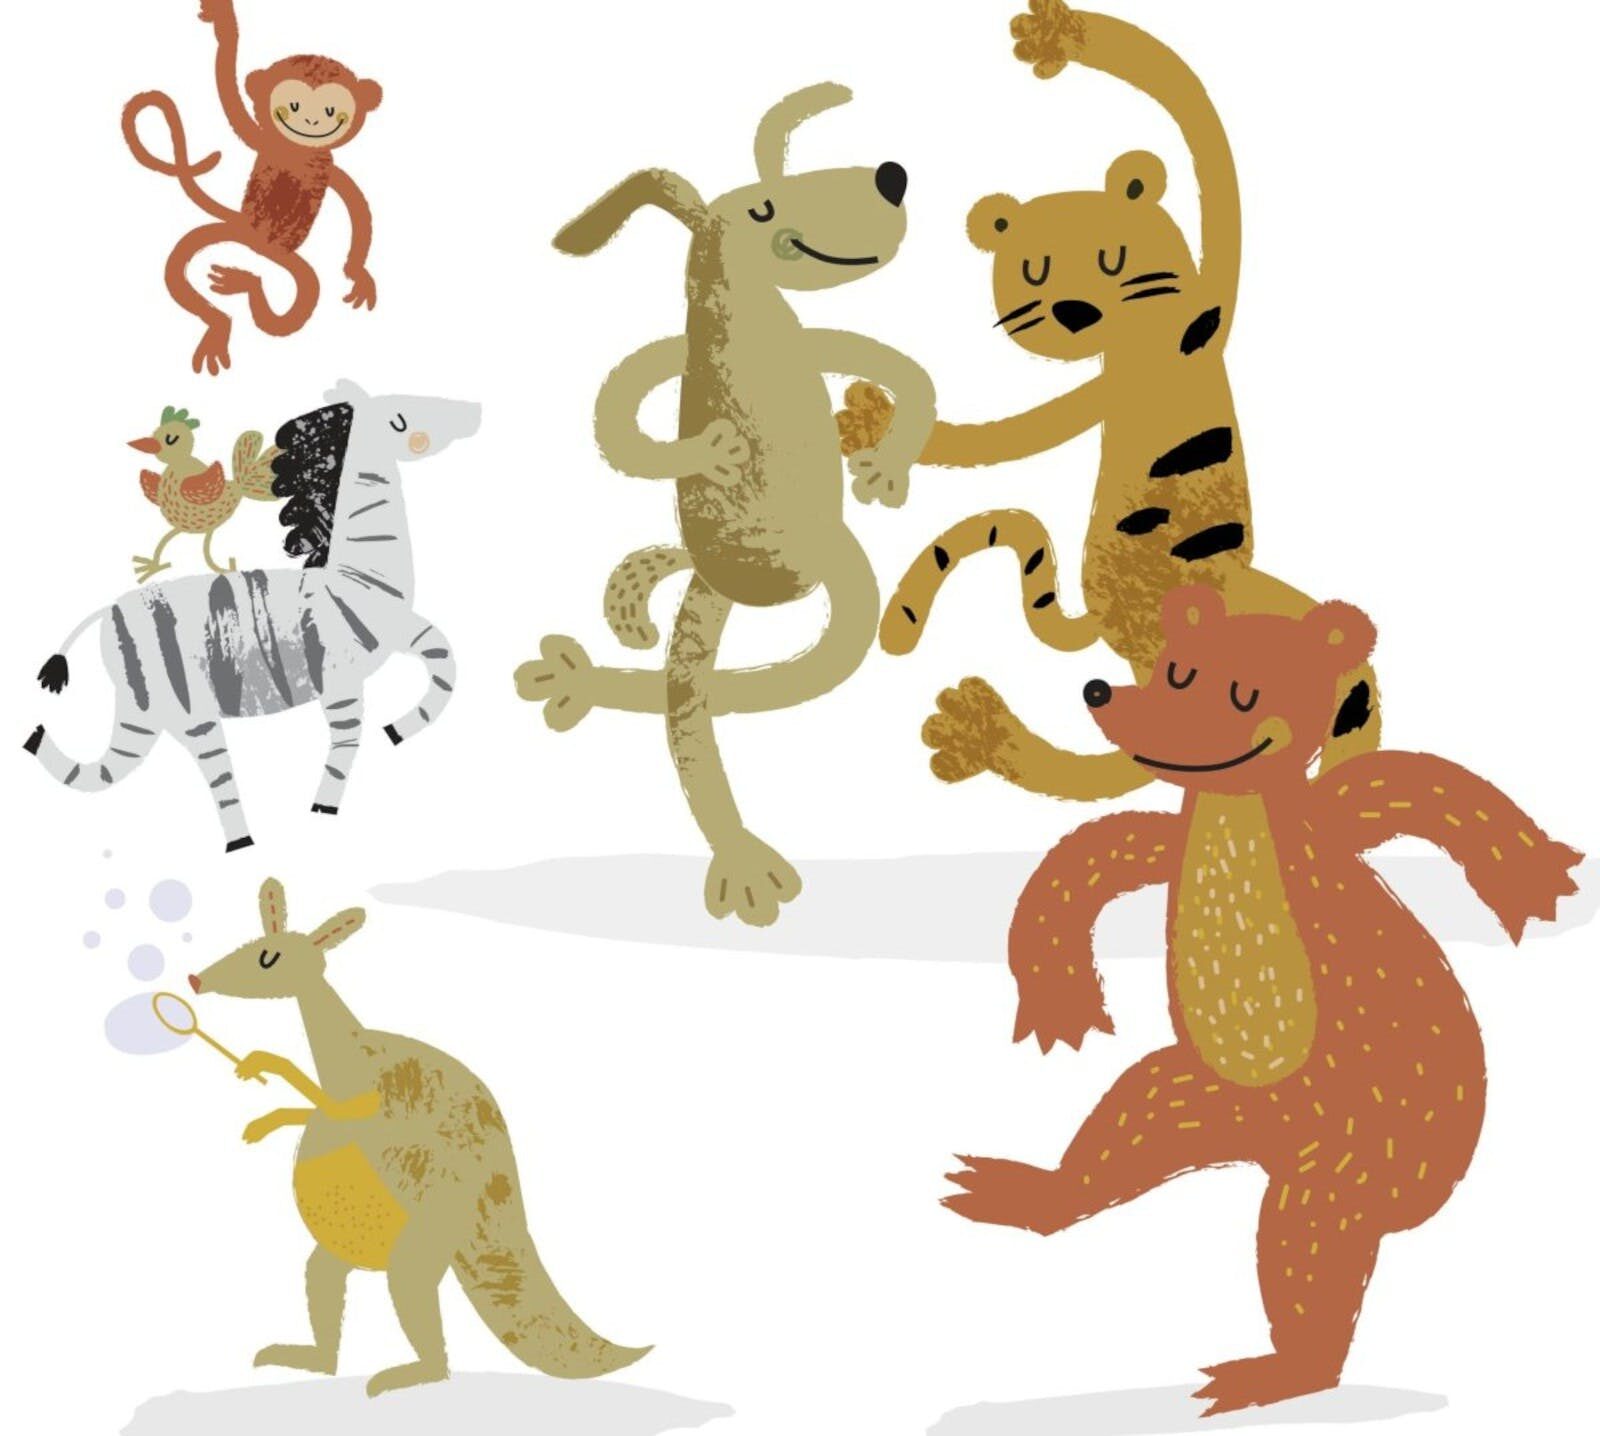 A drawing of various animals, dancing around and smiling, against a solid white background.